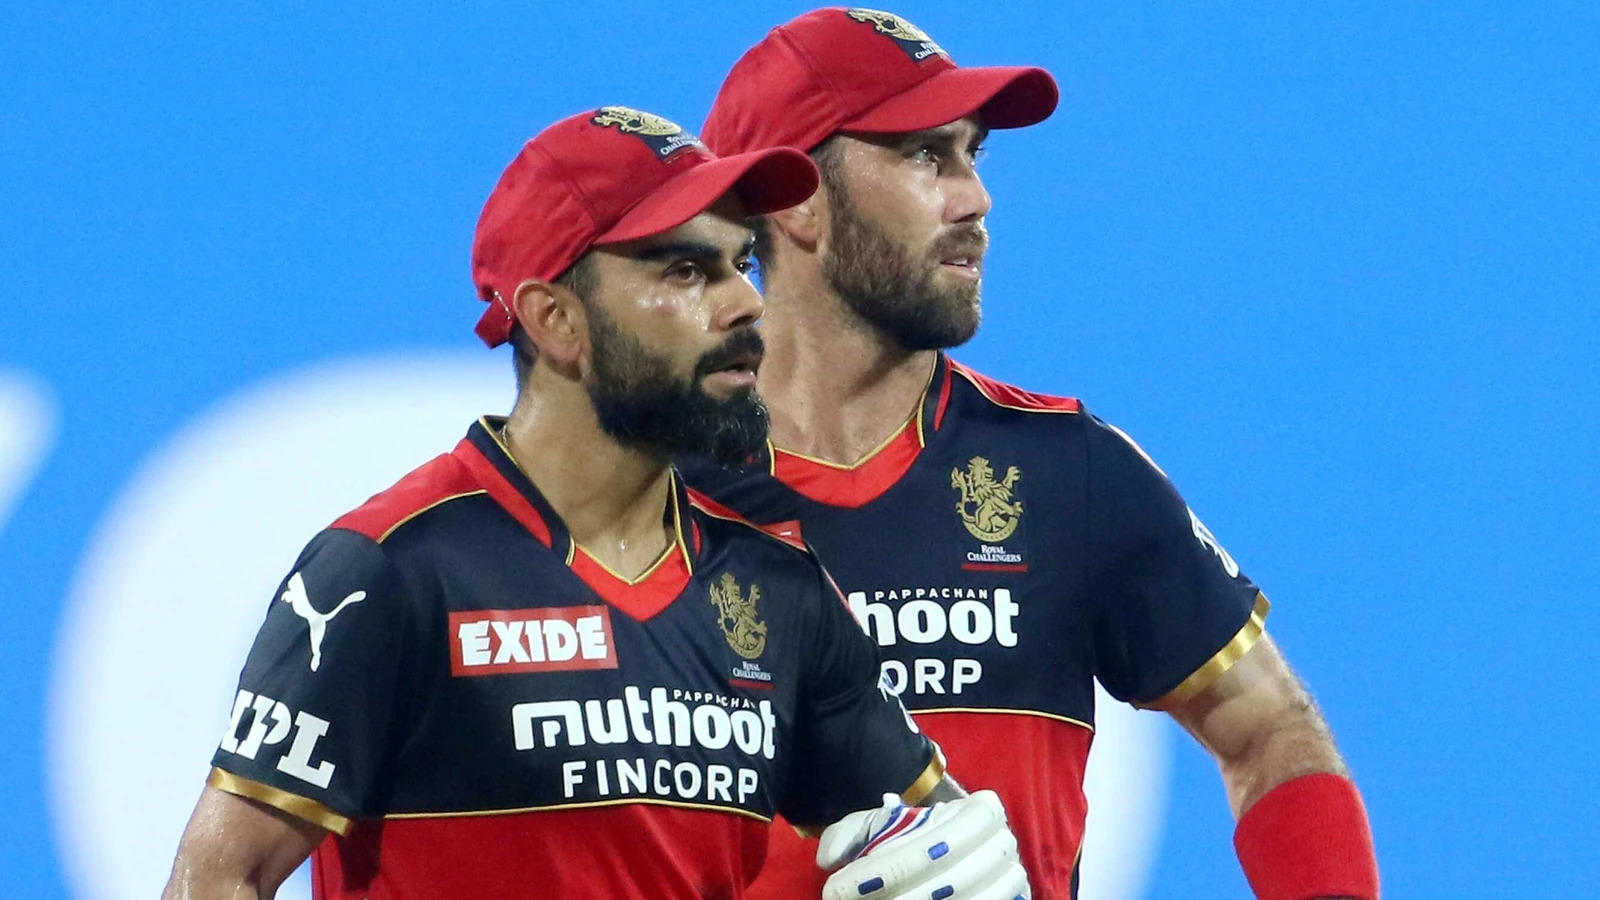 Watch as Kohli and Maxwell engage in a tense game of rock-paper-scissors against PBKS in mid-review. The Australian star's response is priceless.